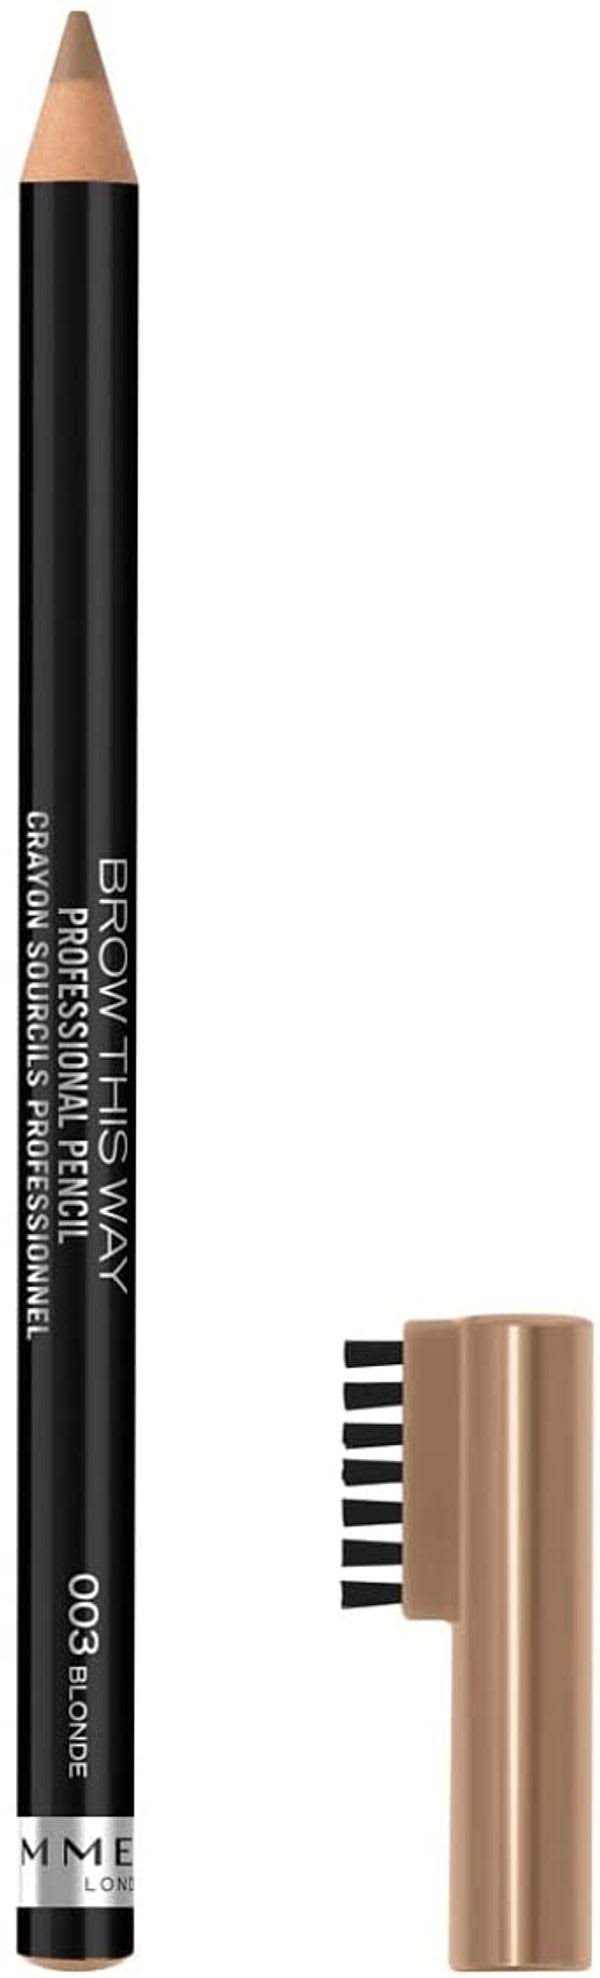 Rimmel London Brow This Way Professional Pencil 003-Blonde